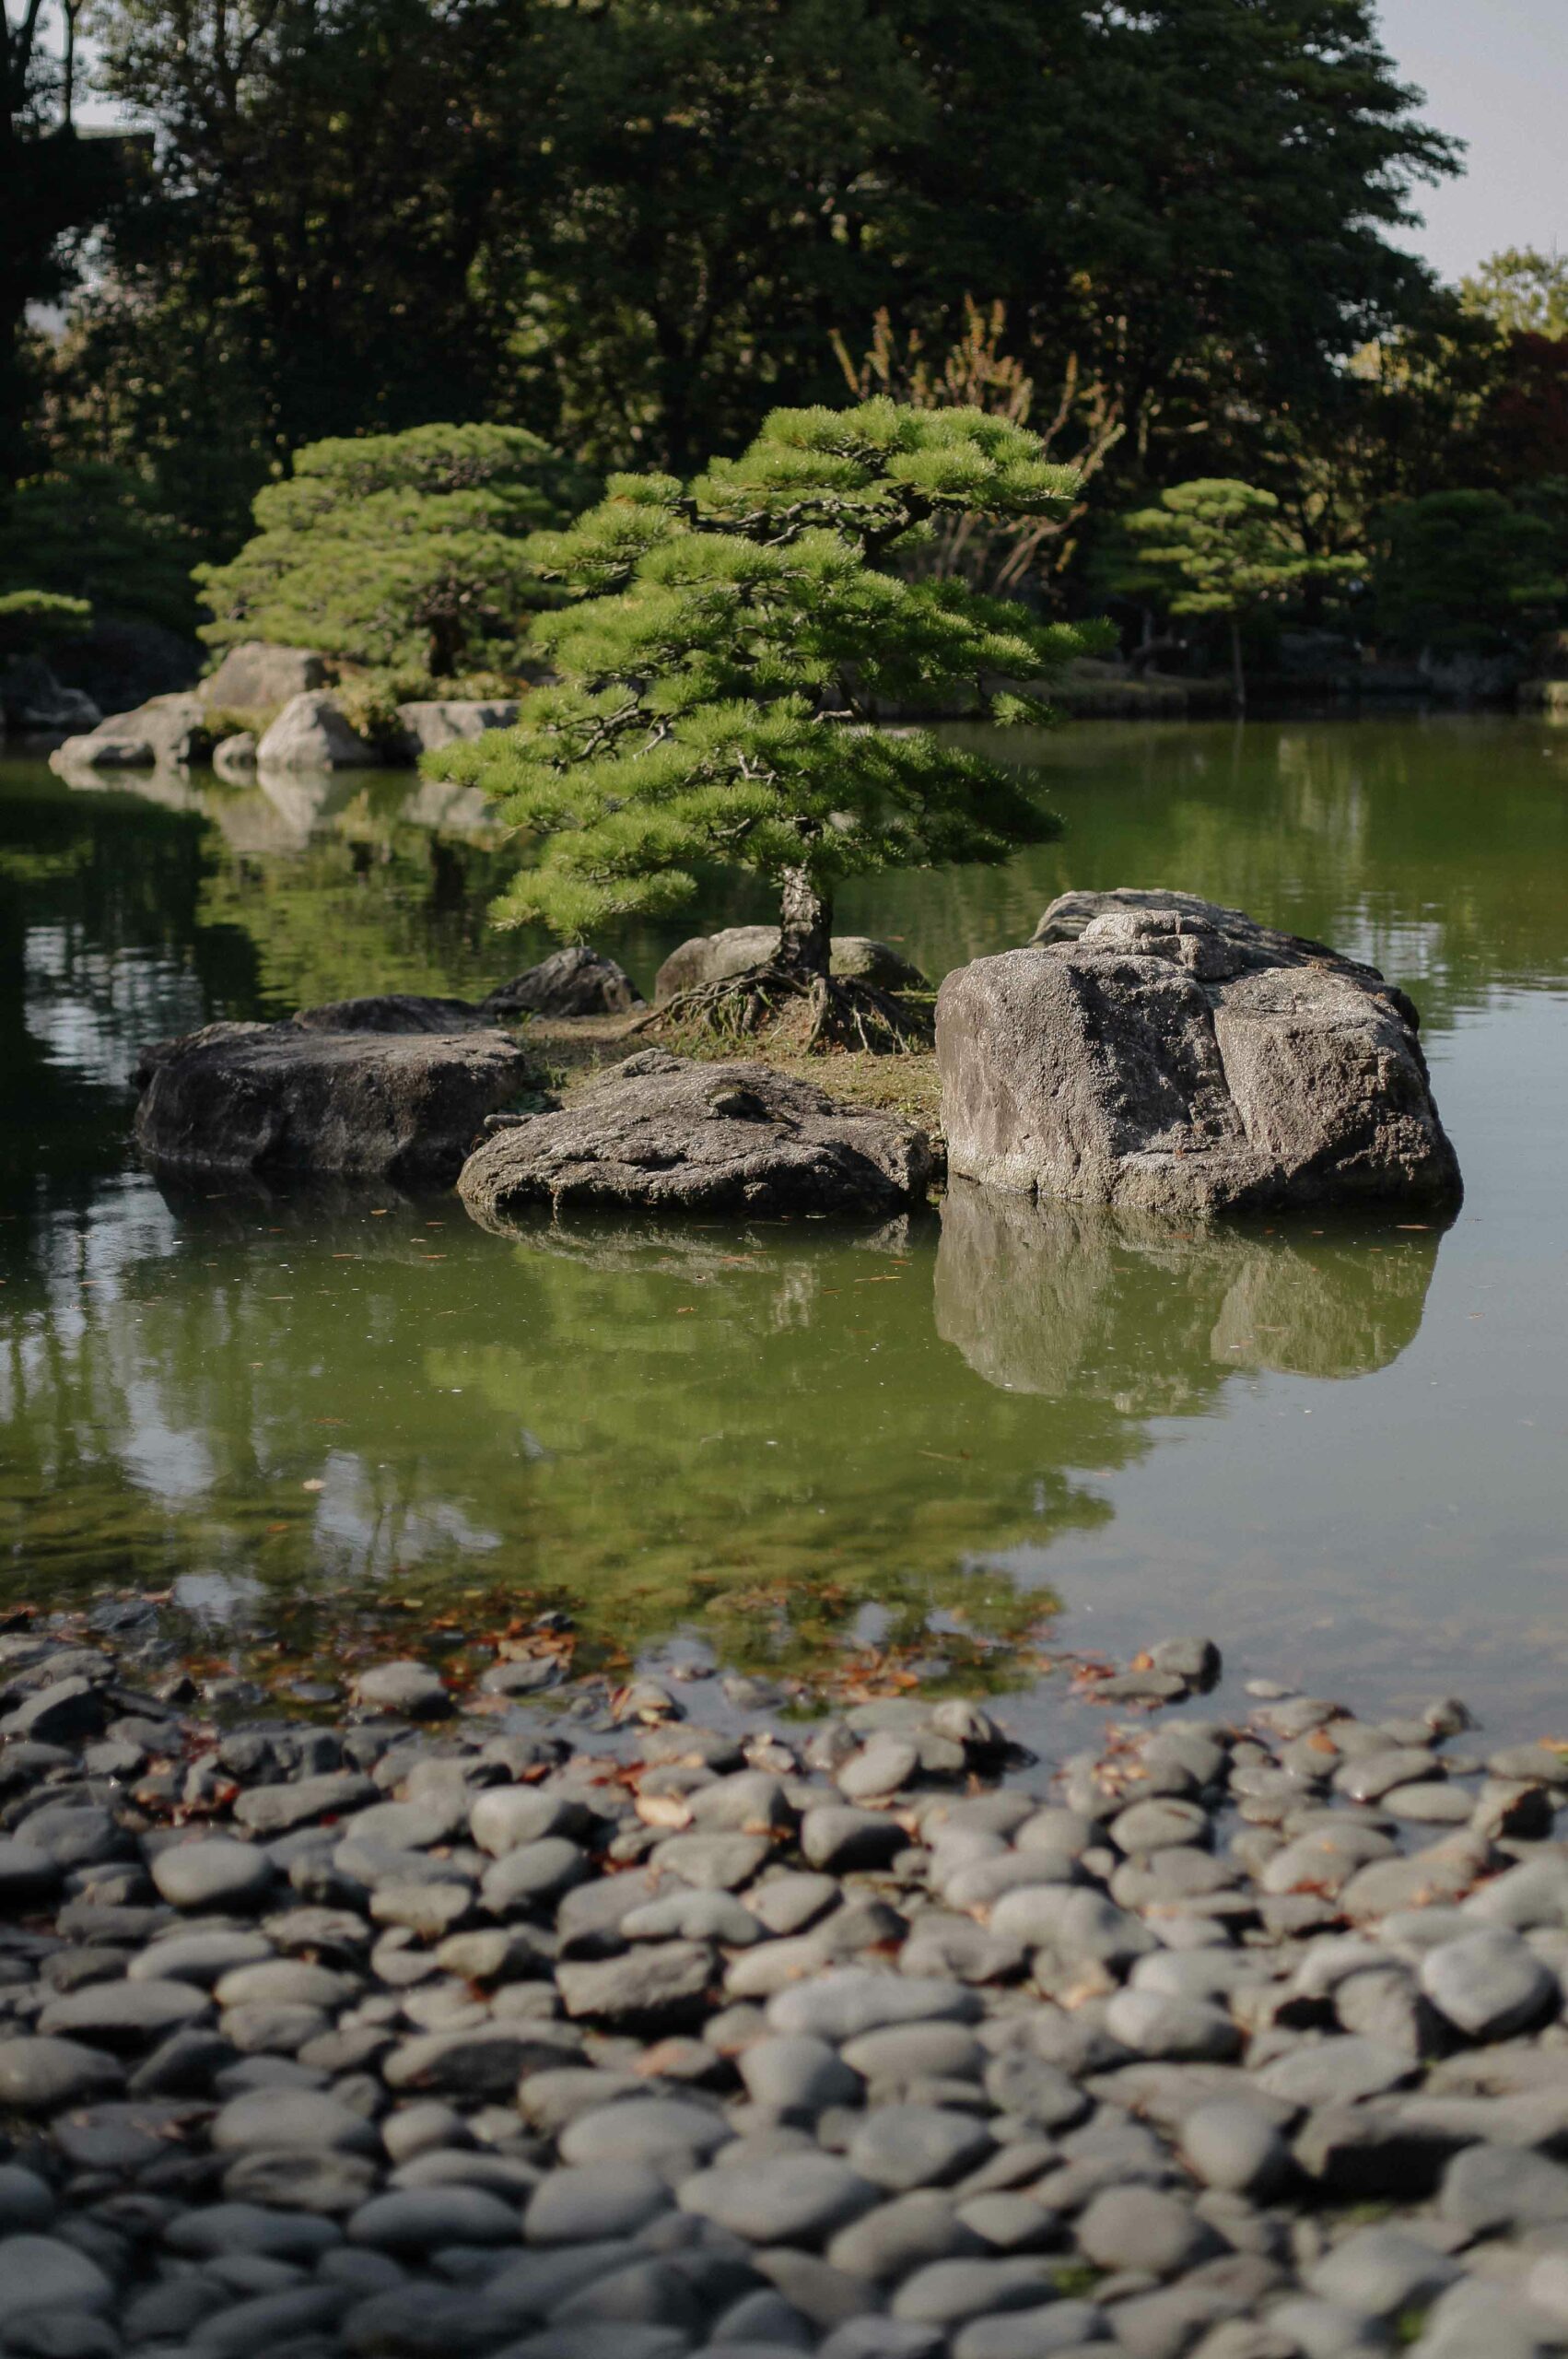 Miniature pines are planted on rock islands within the pond area.